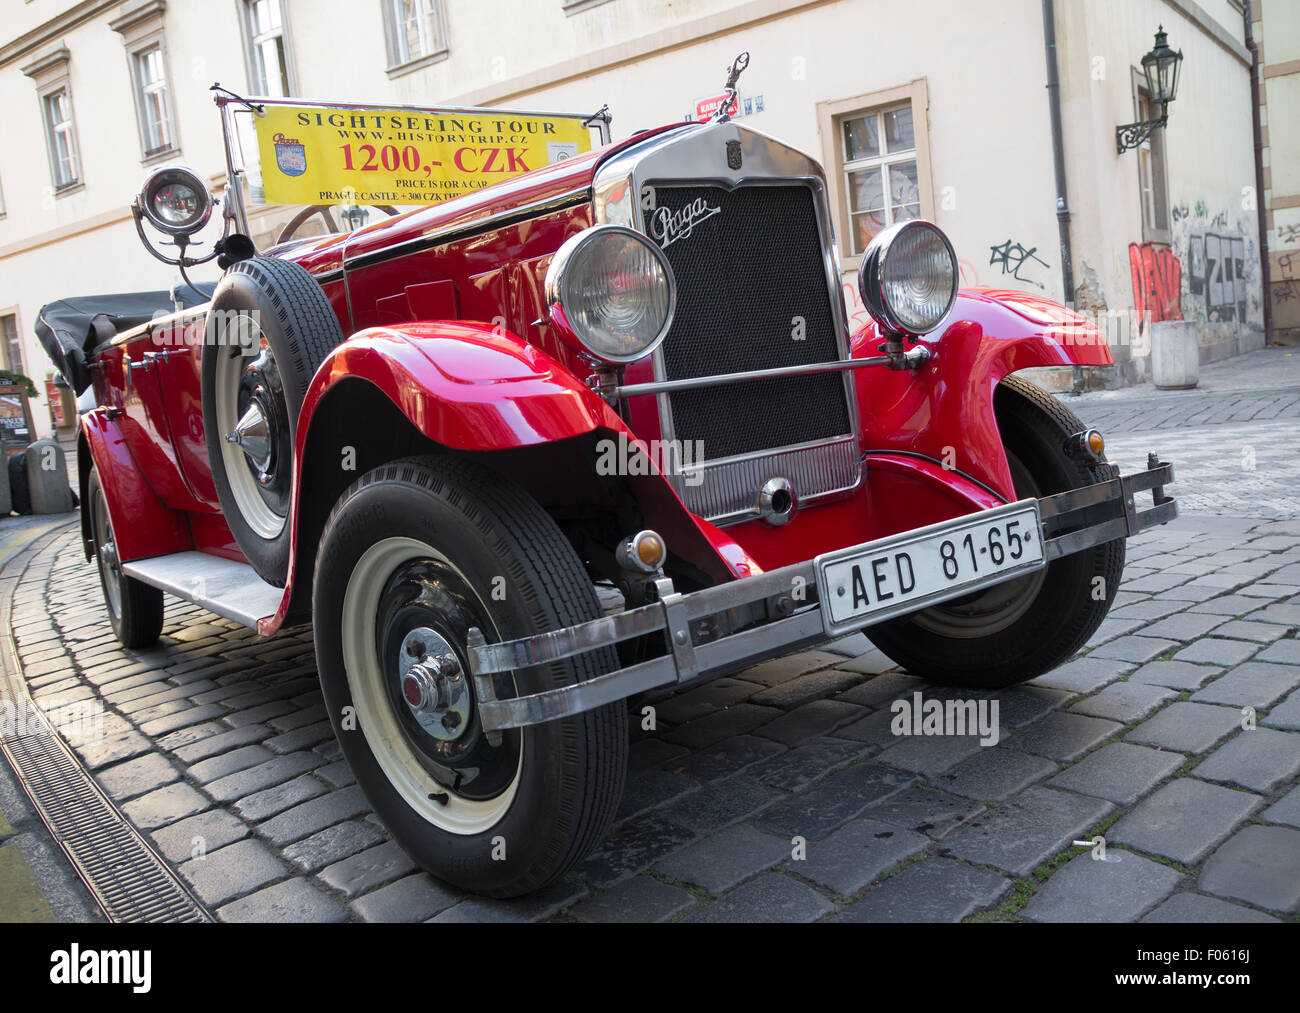 Red Praga car used for sightseeing tours in the streets of prague. Stock Photo